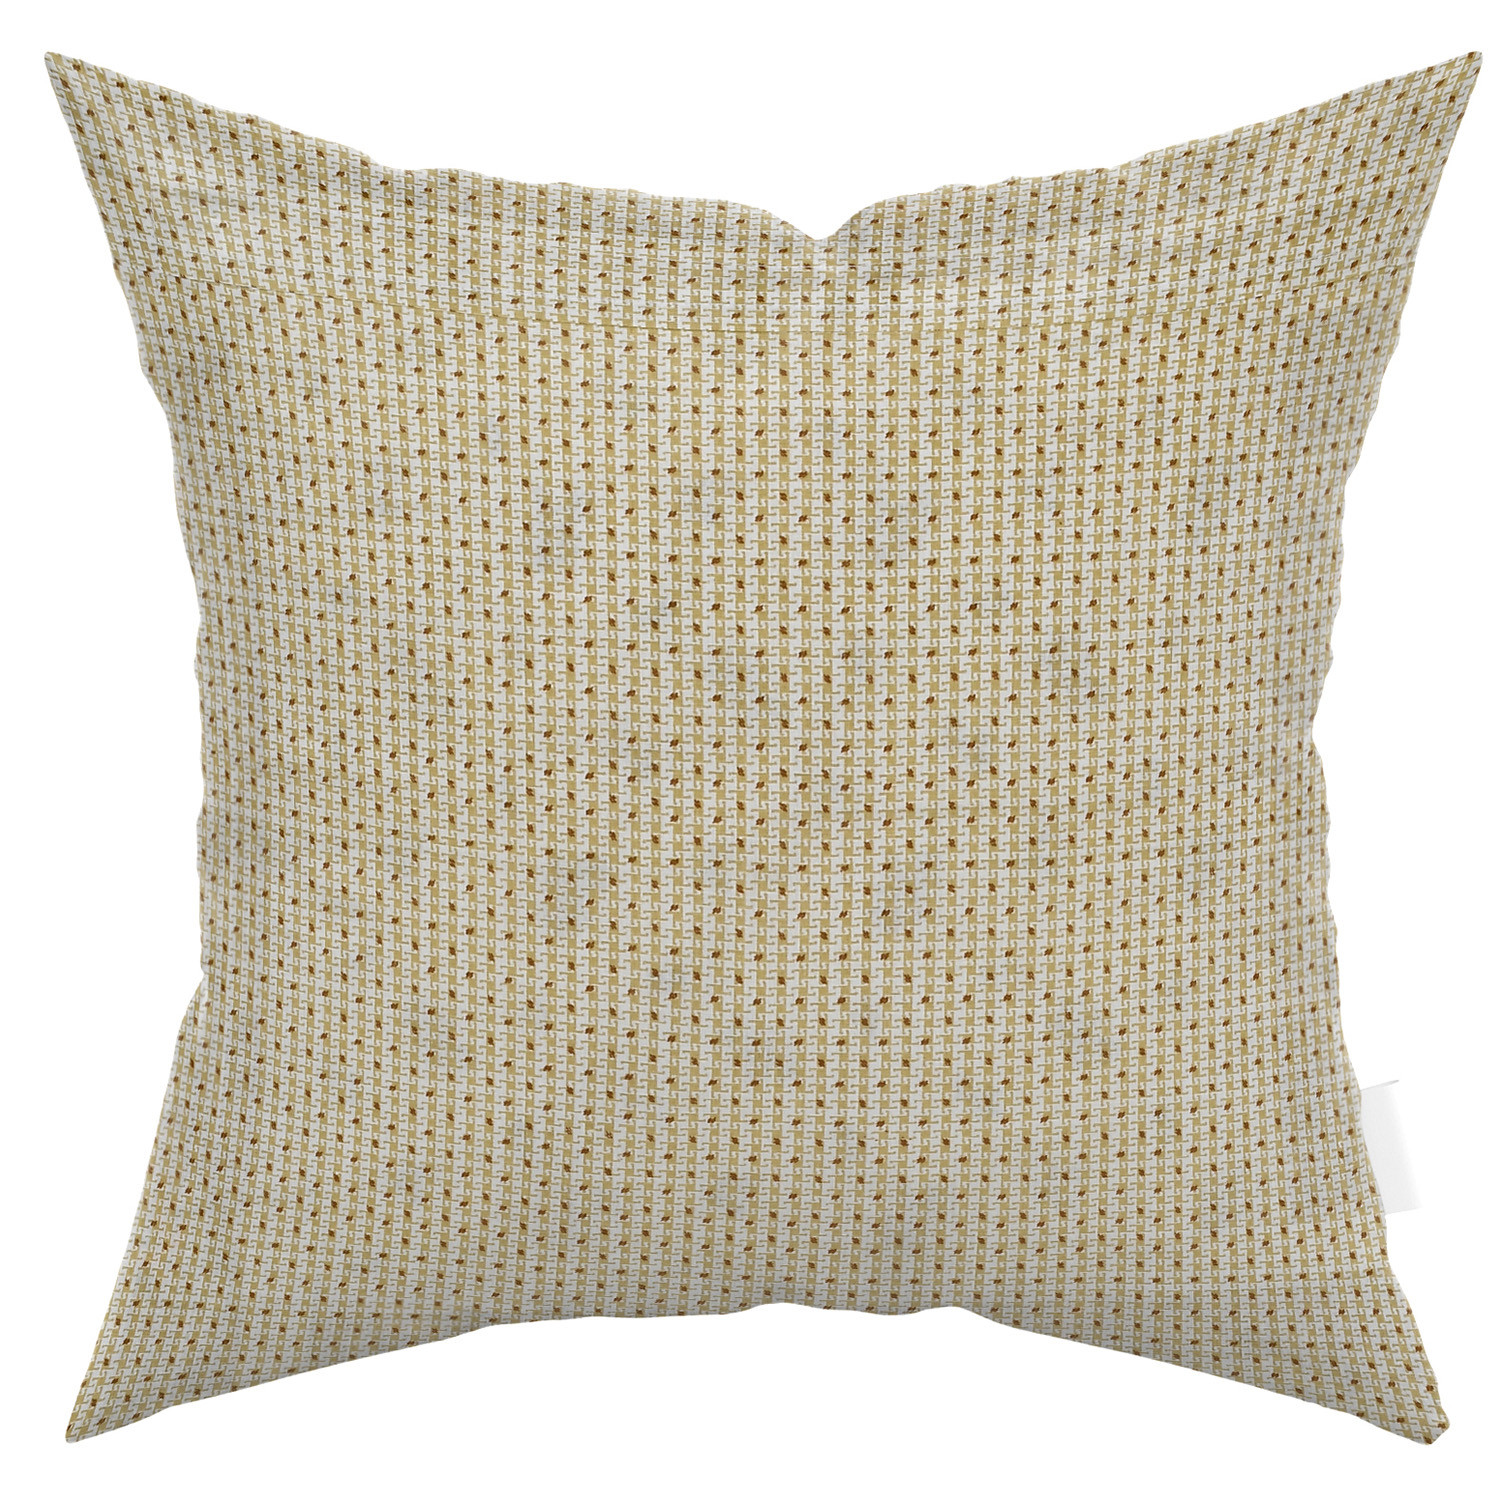 Kuber Industries Cushion Cover|Ractangle Cushion Covers|Sofa Cushion Covers|Cushion Covers 16 inch x 16 inch|Cushion Cover Set of 5|YELLOW